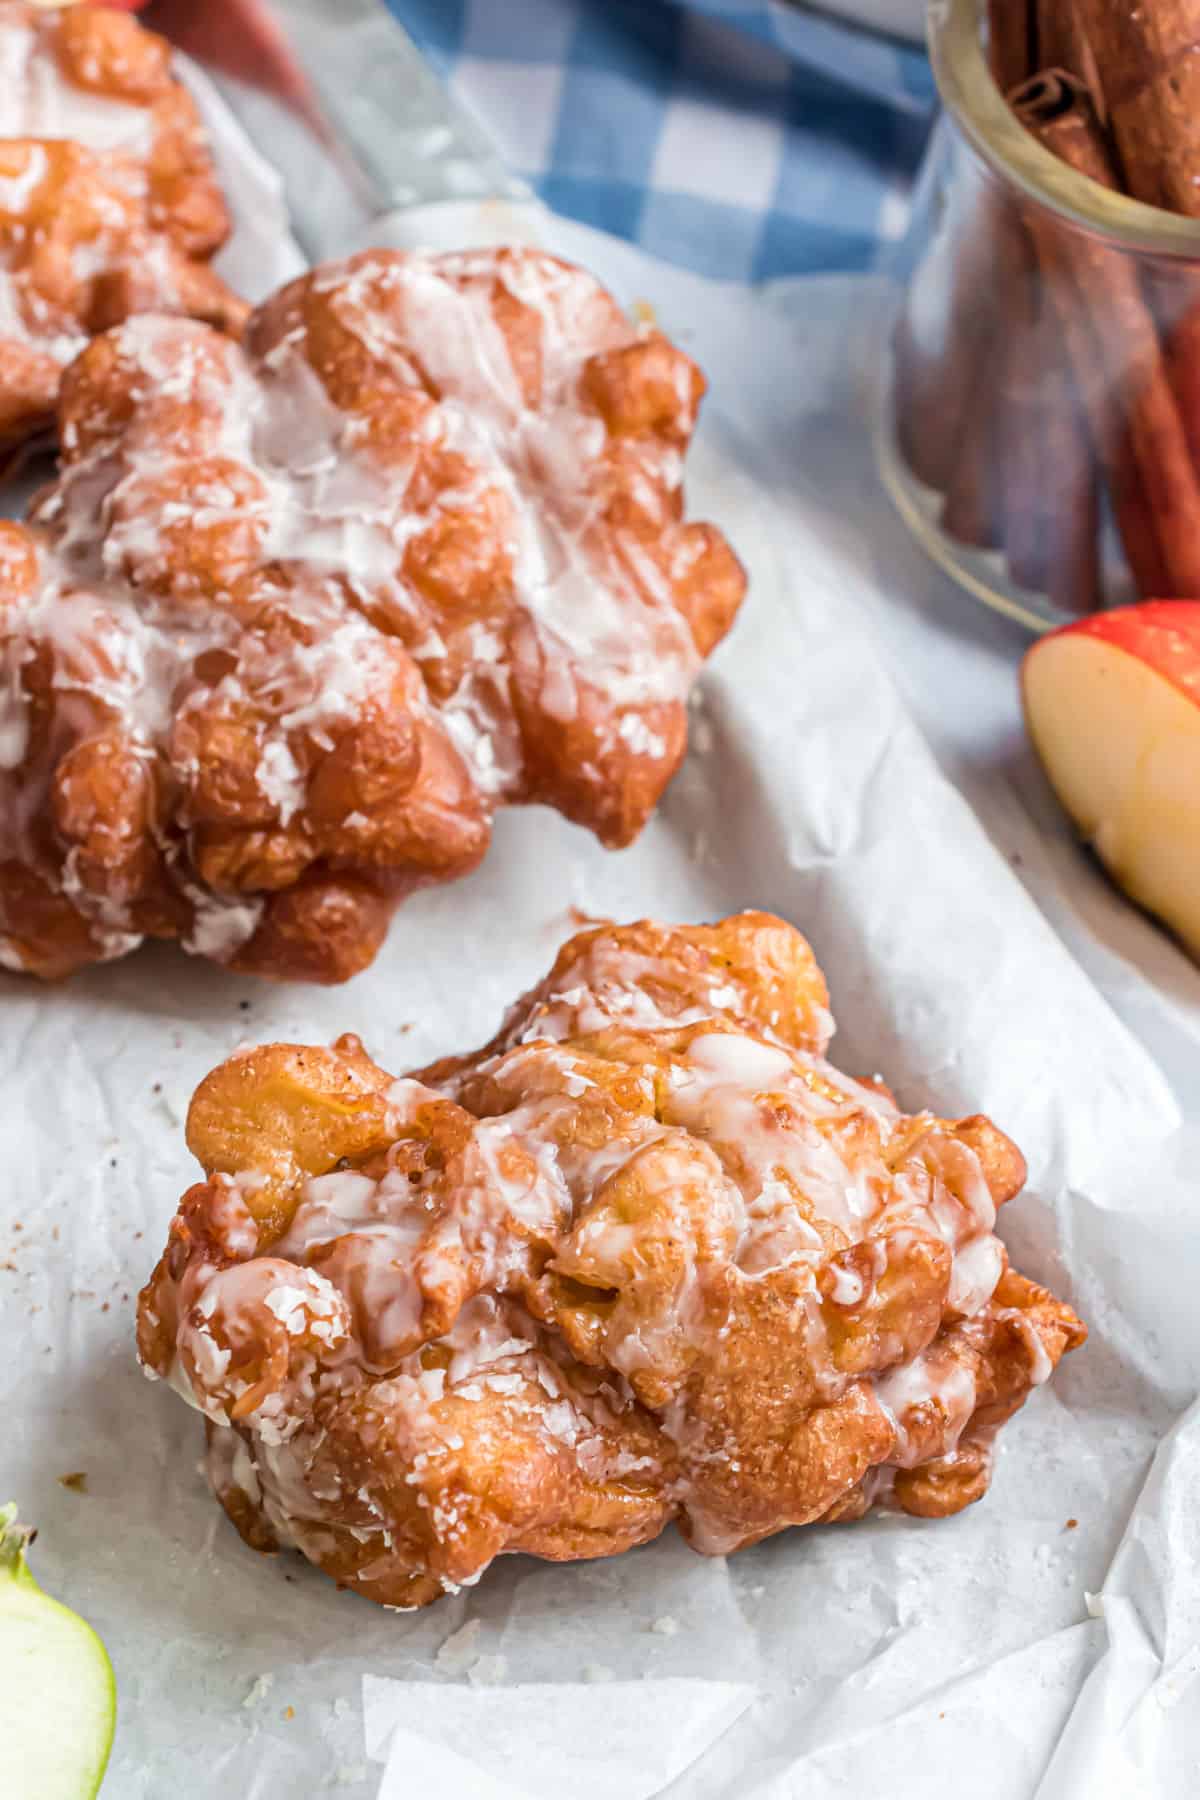 Fried apple fritters on parchment paper.